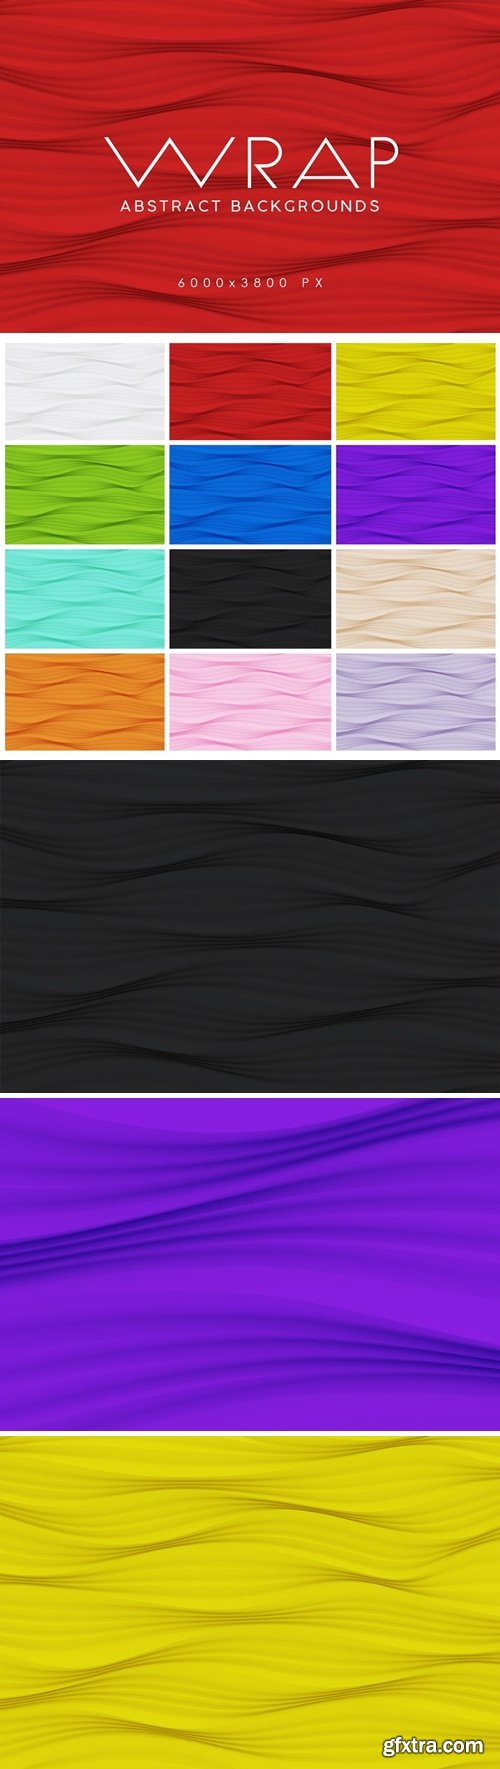 Wrap Abstract Backgrounds 2